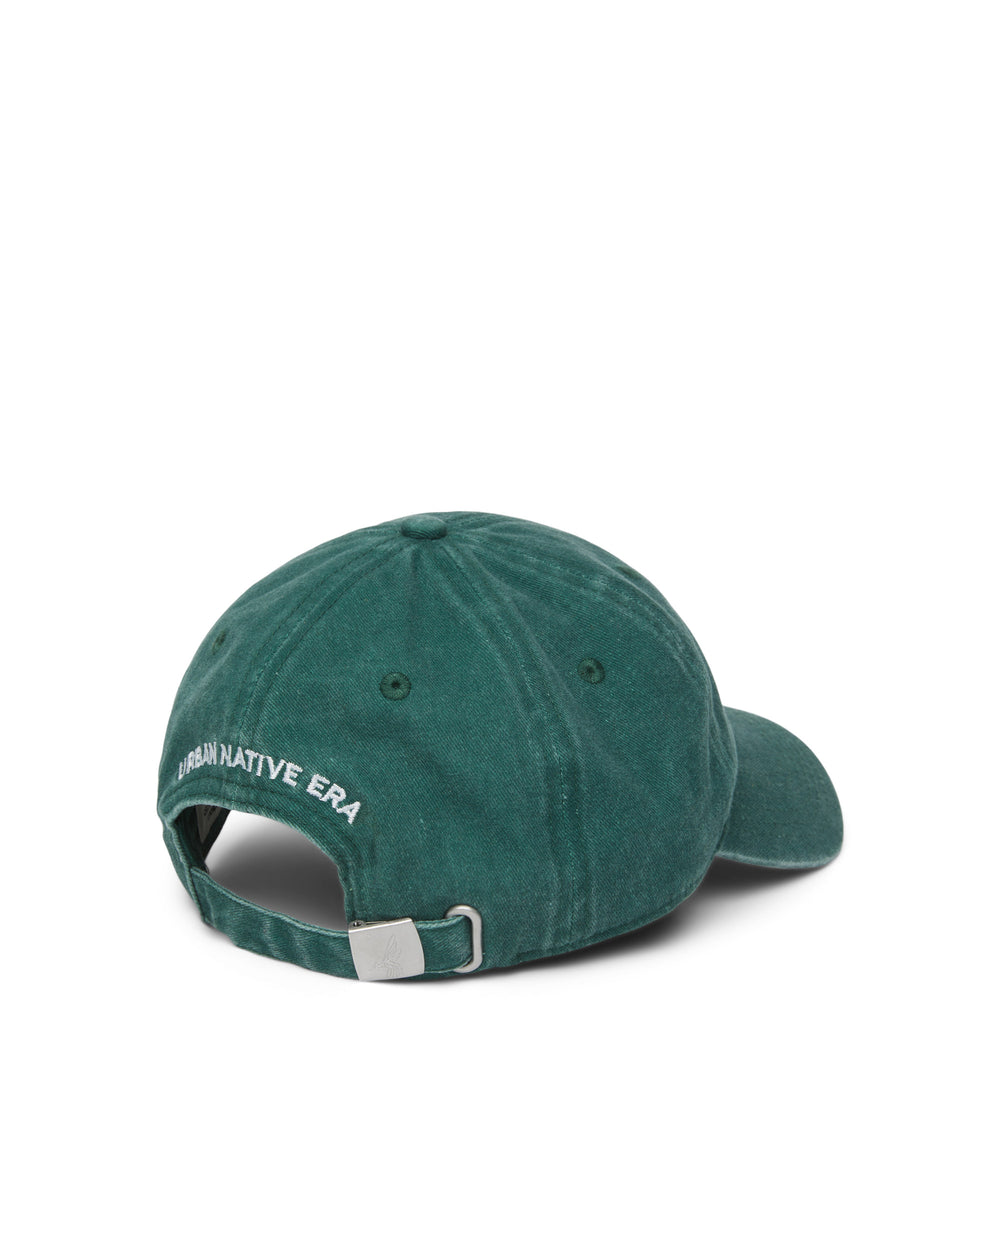 'YOU ARE ON NATIVE LAND' DAD CAP - DARK GREEN